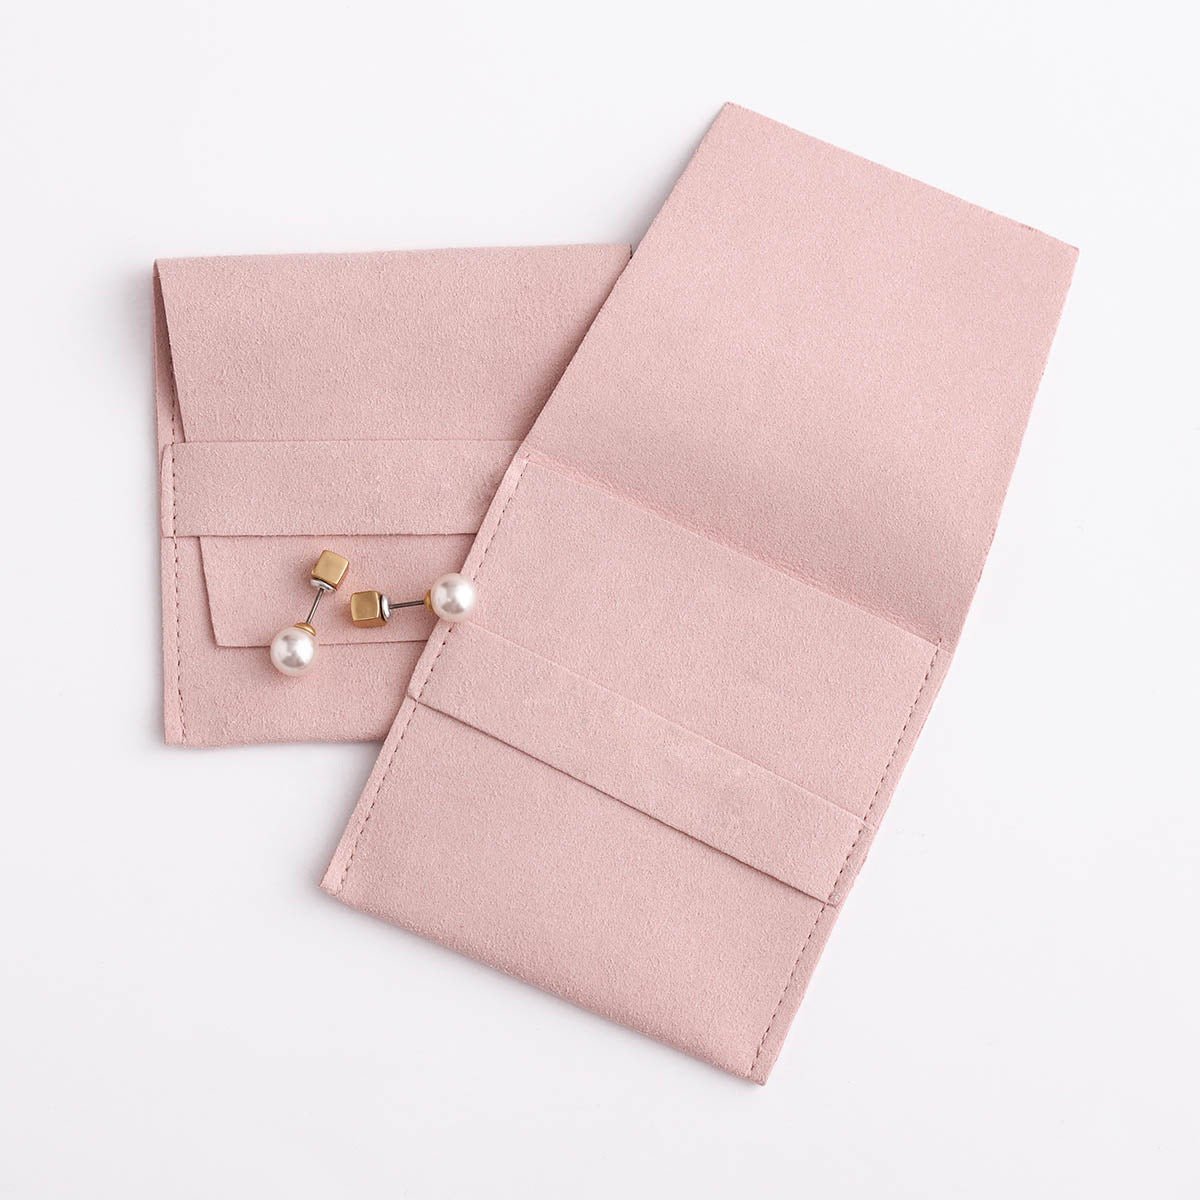 custom microfiber pouch microfiber jewelry pouch microfiber pouch Microfiber Jewelry Pouch Luxury Small Jewelry Gift Bag Necklace Earrings Rings Package with Band, Pink YIFU DISPLAY